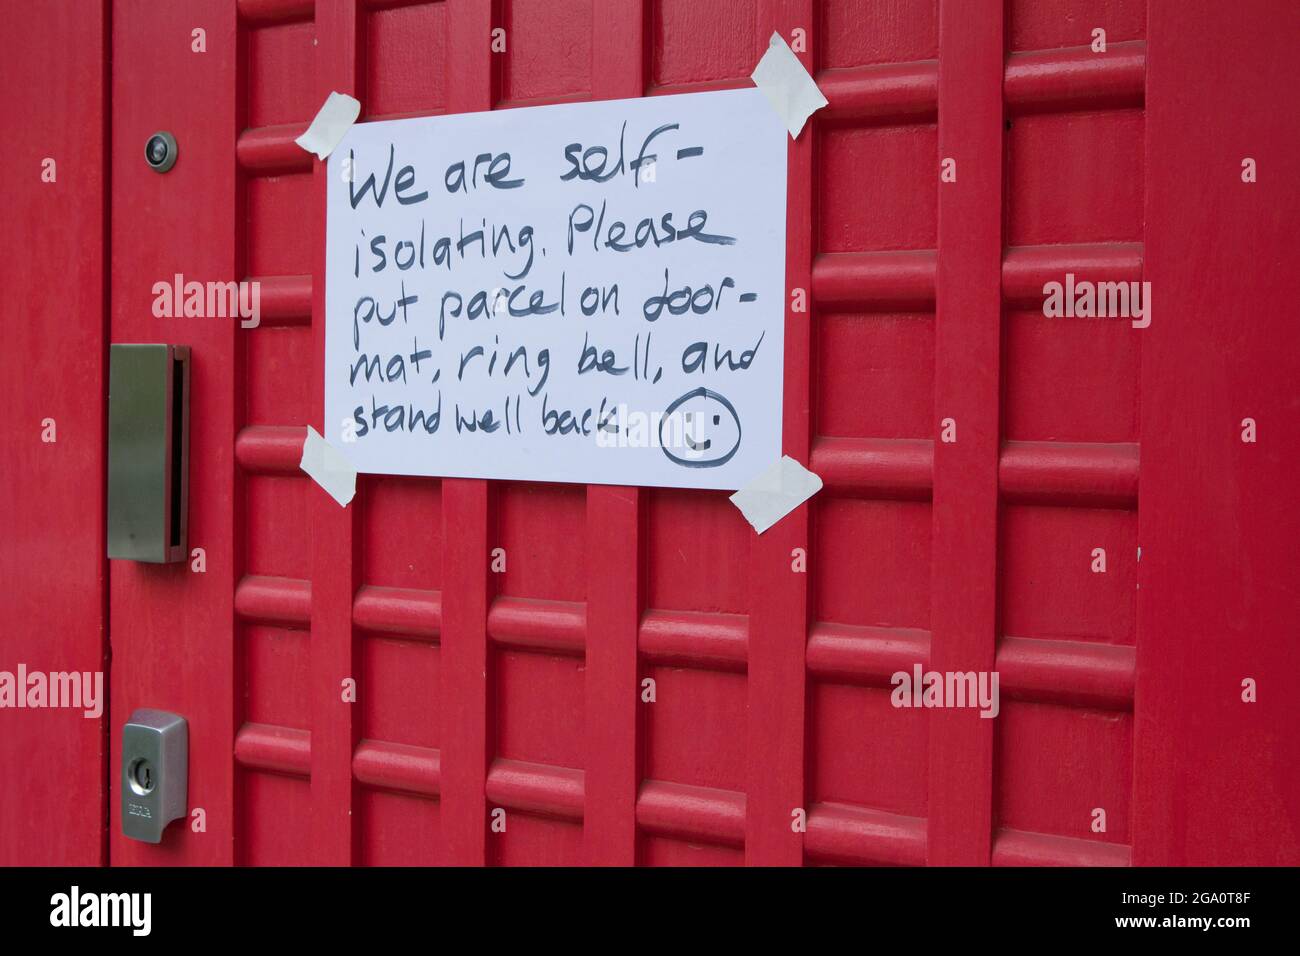 London, UK, 28 July 2021: on the front door of a house in Clapham a hand-written sign warns delievery drivers that the residents are self-isolating. With the pingdemic causing many people to self-isolate, the country is reliant as much as ever on delivery drivers. Seven days of falling numbers of new cases have given some hope that the third wave isn't as bad as some might have feared. Anna Watson/Alamy Live News Stock Photo